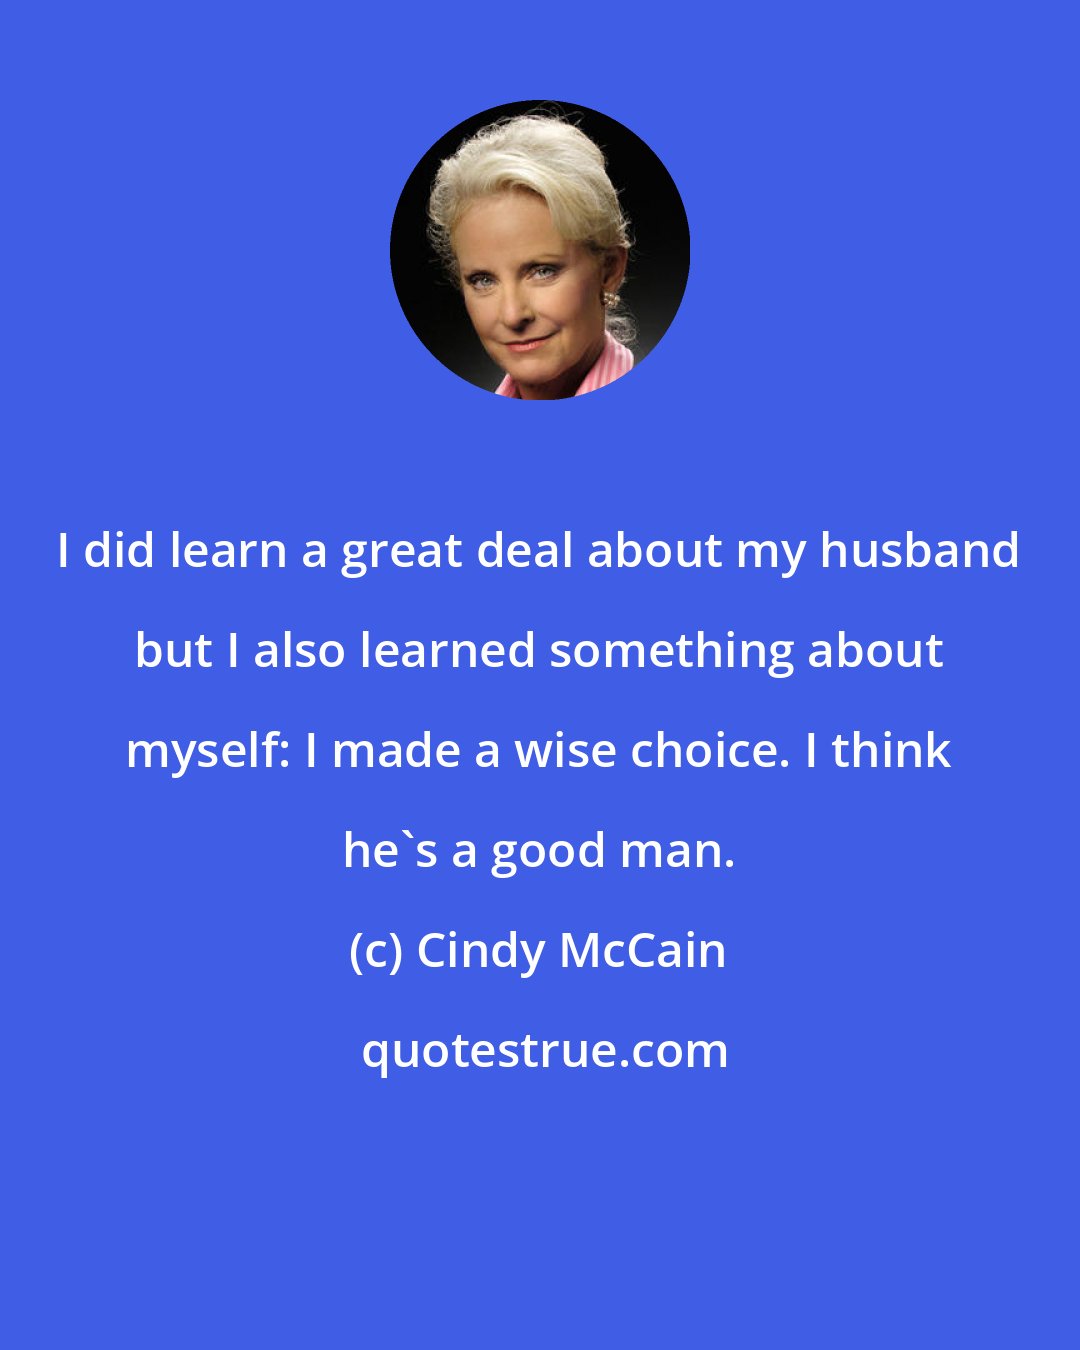 Cindy McCain: I did learn a great deal about my husband but I also learned something about myself: I made a wise choice. I think he's a good man.